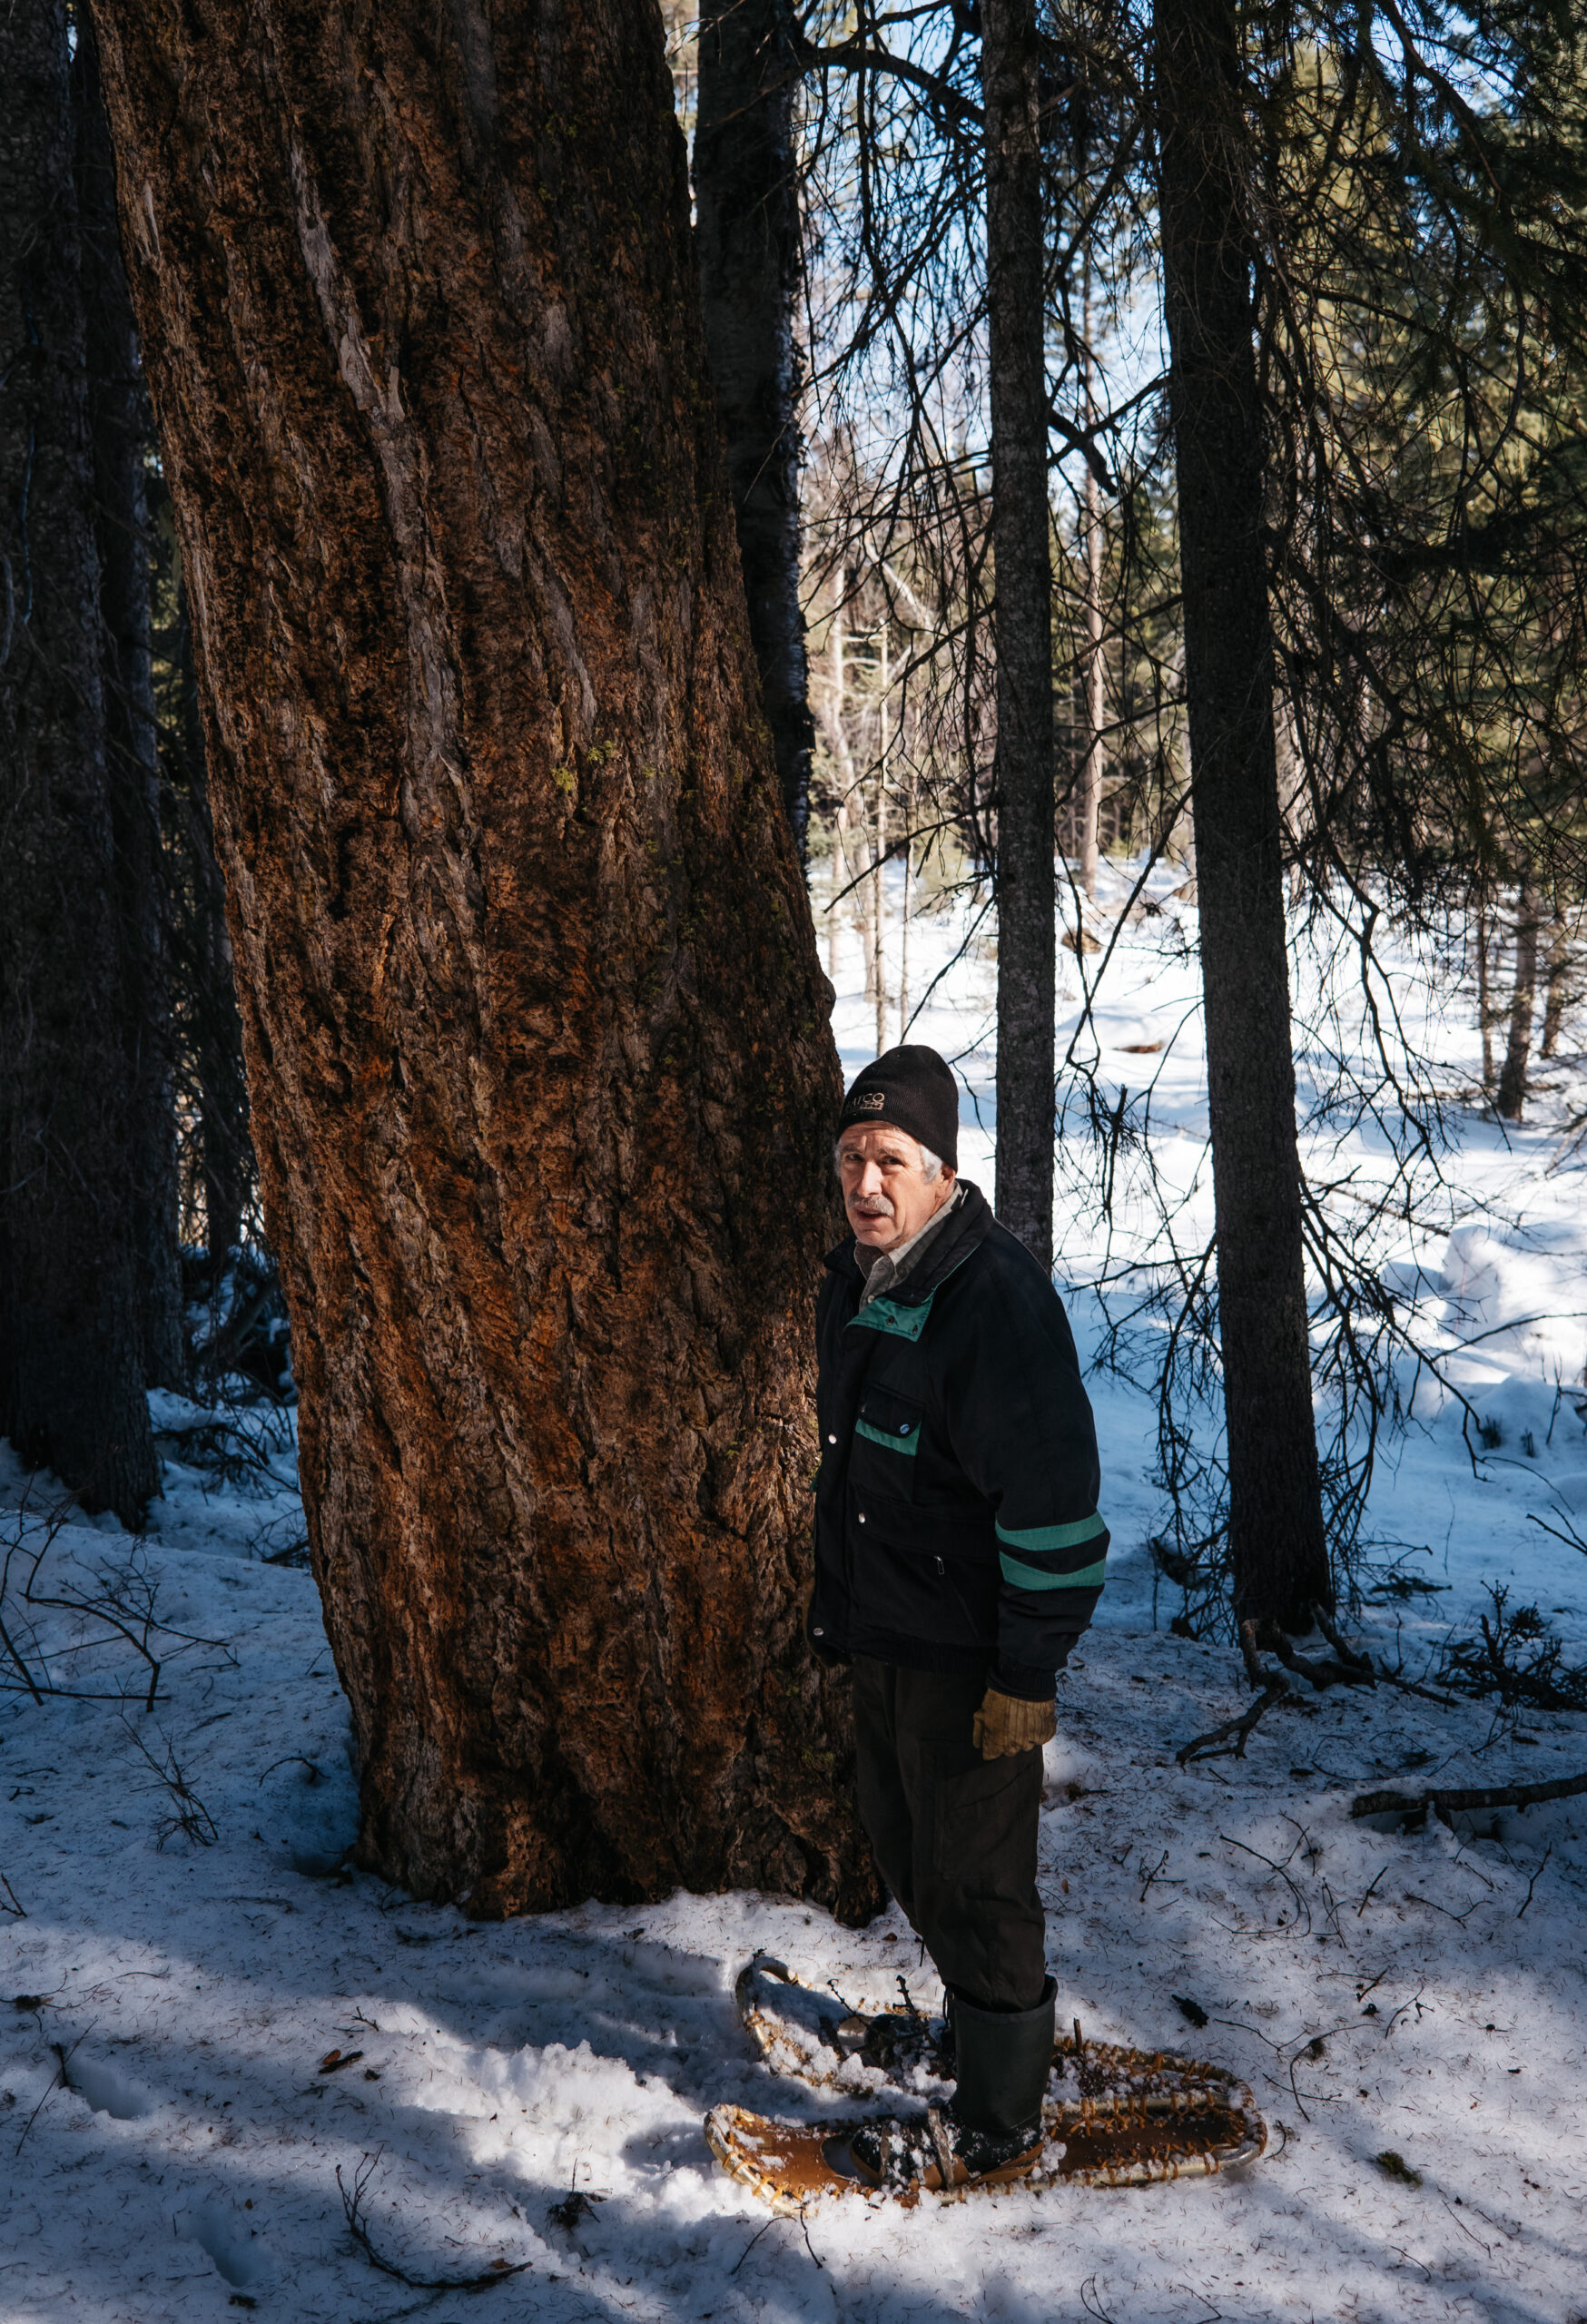 George Delisle stands next to one of the largest Douglas fir trees on his woodlot. Through selective logging he has created a forest that carries a variety of tree species with wide-ranging ages.